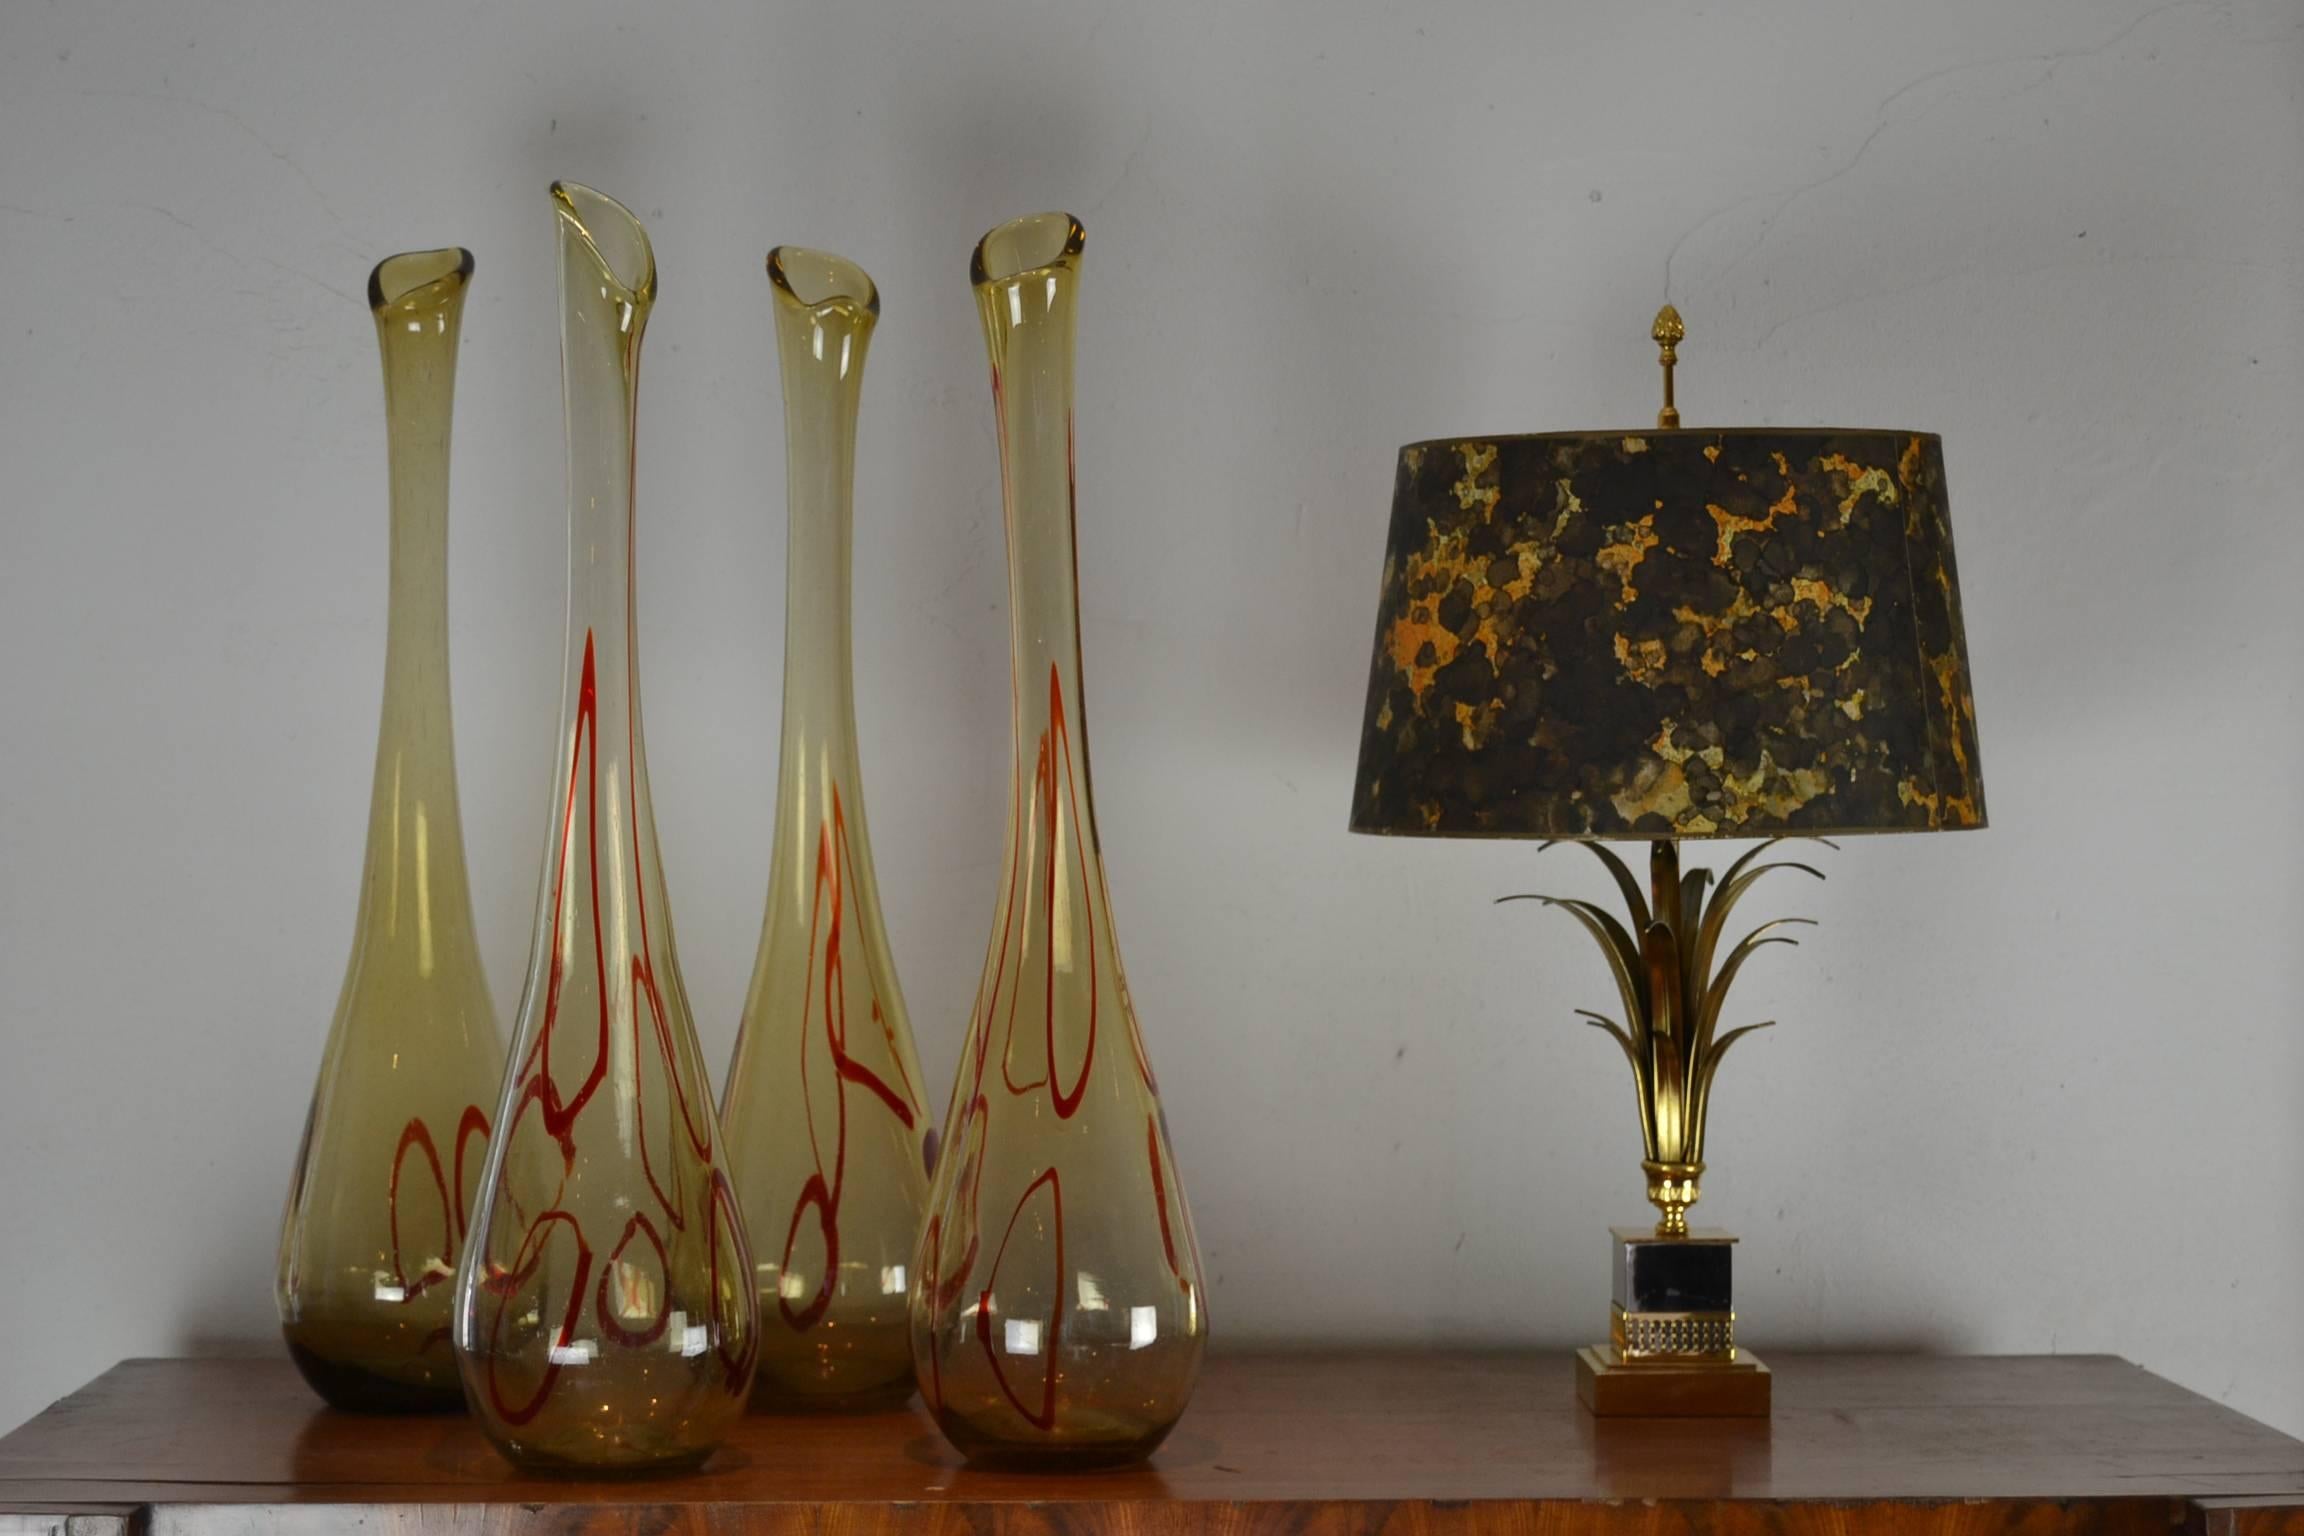 Beautiful large vintage stretch modernist handblown amber - caramel colored glass swung Bud Vases with red ribbon swirl.  
The glass of the floor vases is bubbled, this gives them a special touch. 
Elegant large ( 25,60 inch - 65cm ! ) teardrop Art